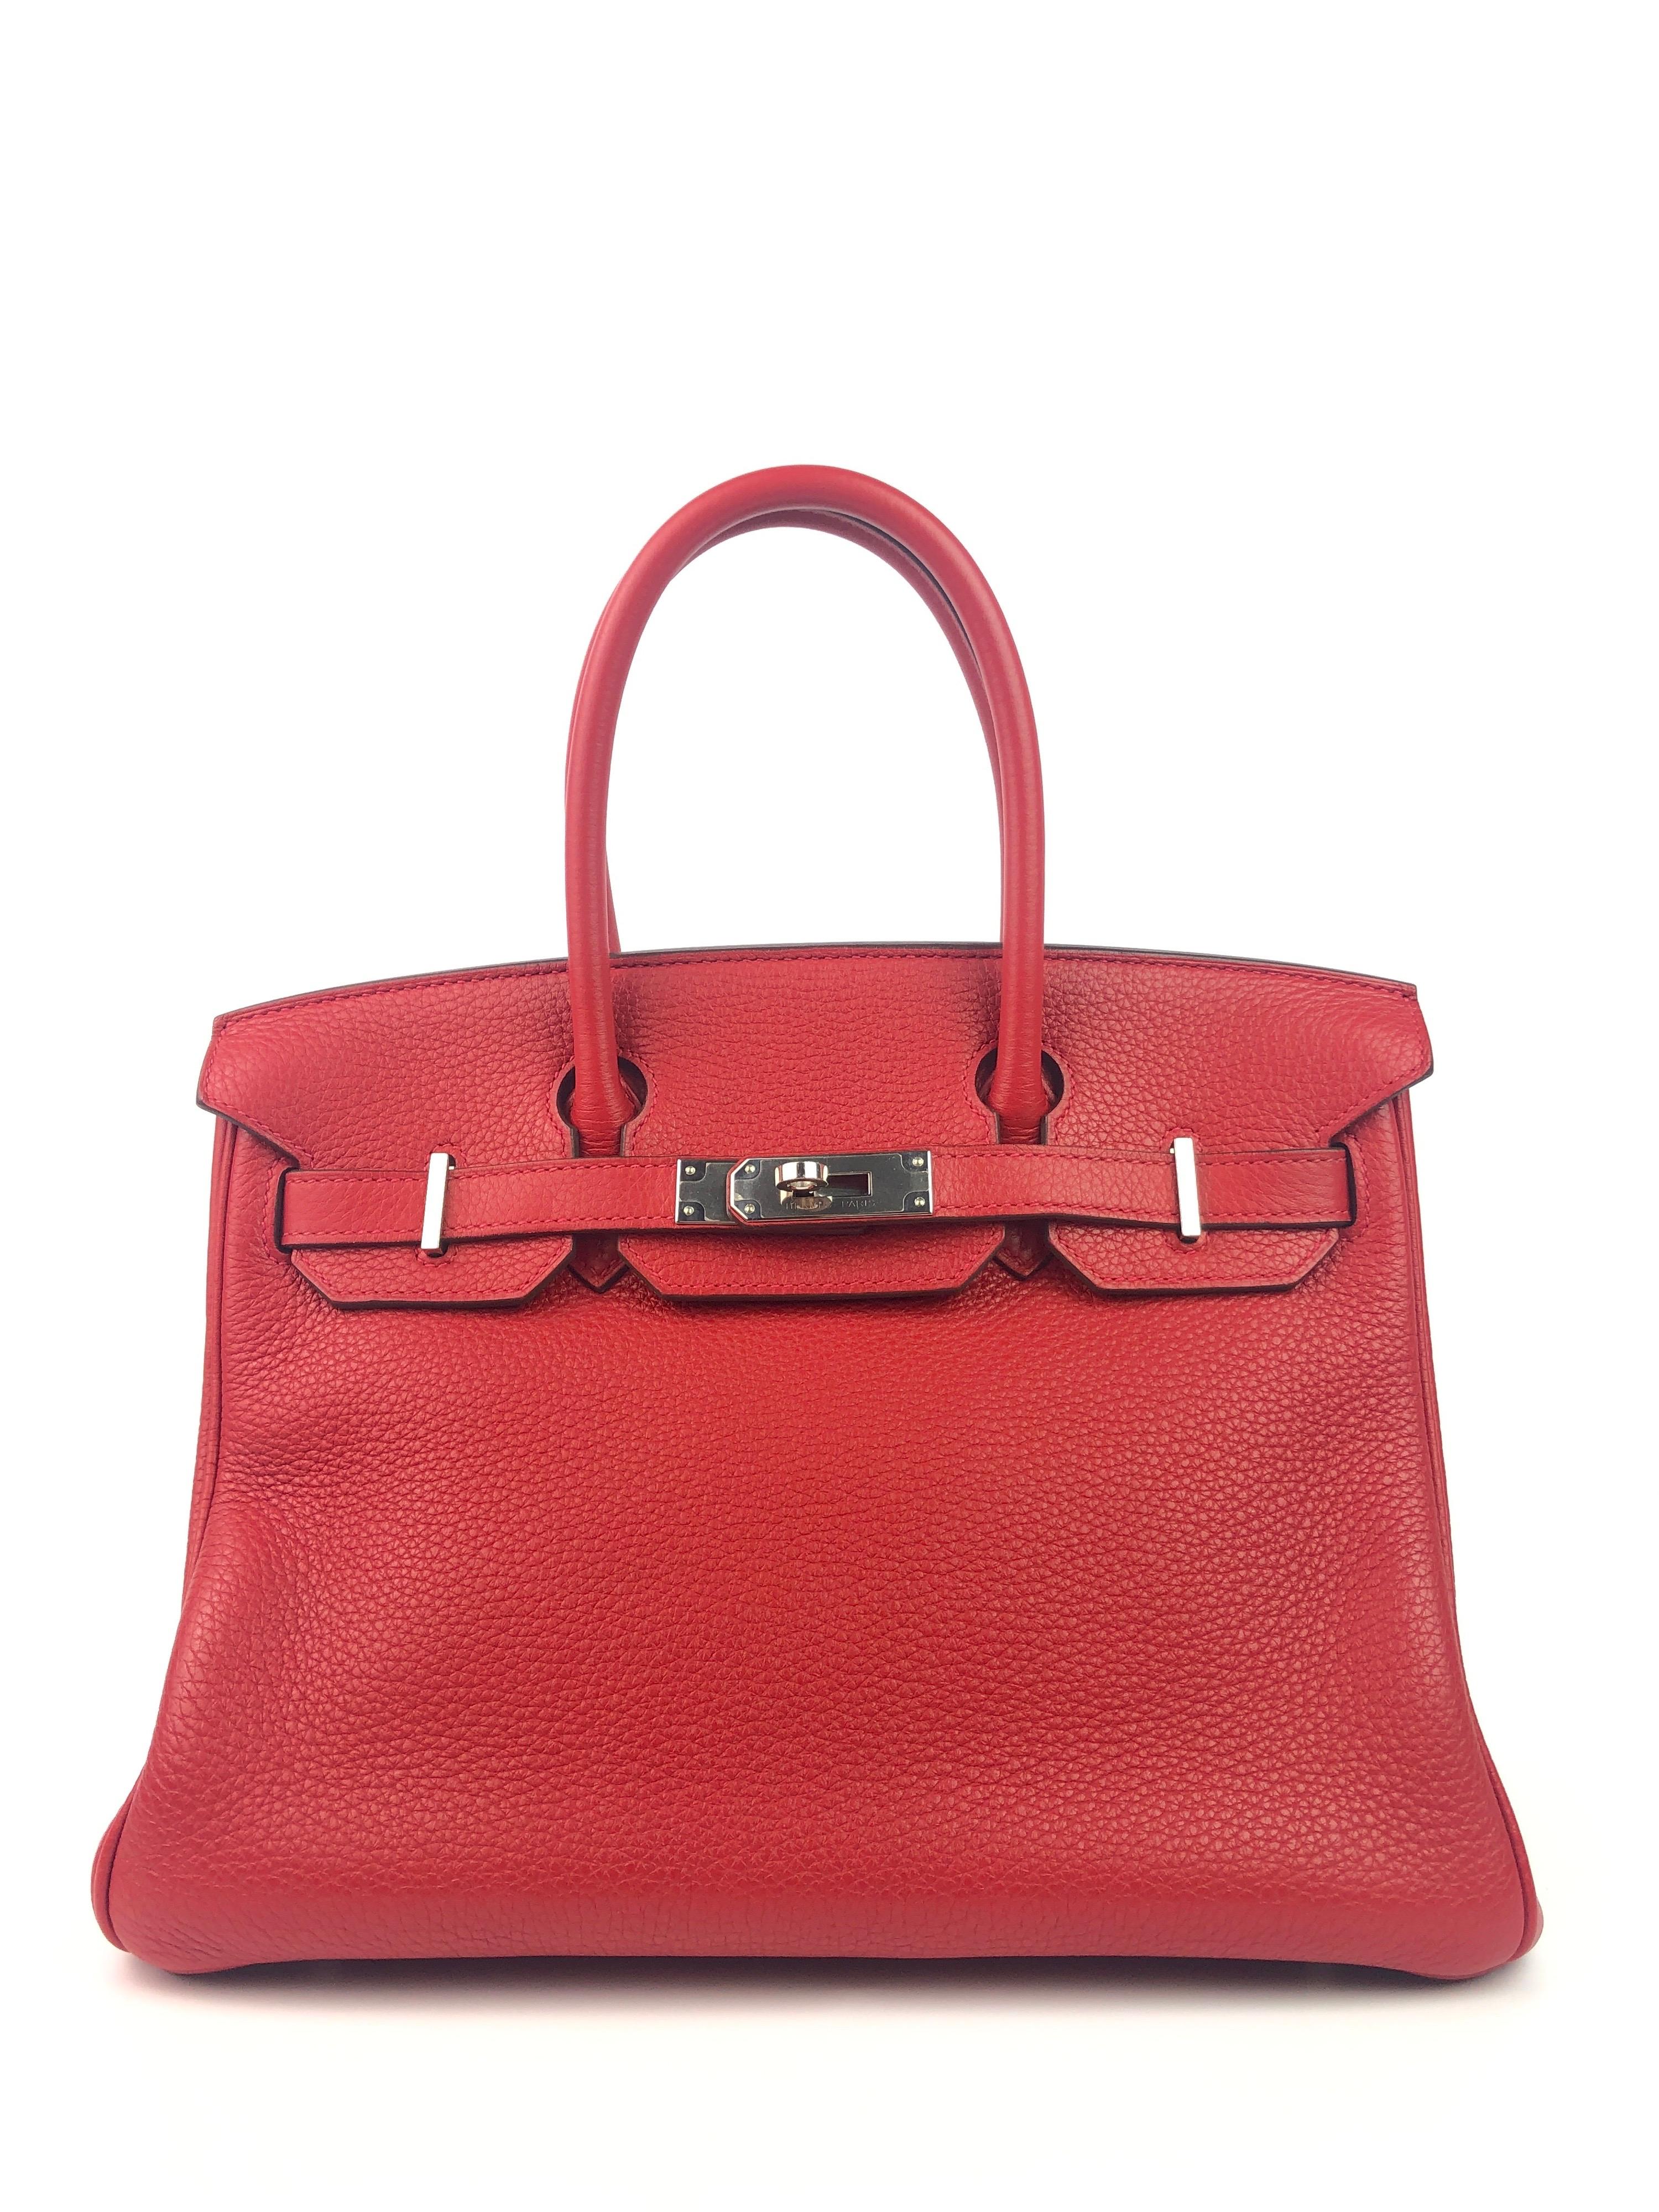 Hermes Birkin 30 Rouge Casaque Red Palladium Hardware. Excellent Condition,  Plastic on hardware, excellent corners and structure.

Shop with Confidence from Lux Addicts. Authenticity Guaranteed! 